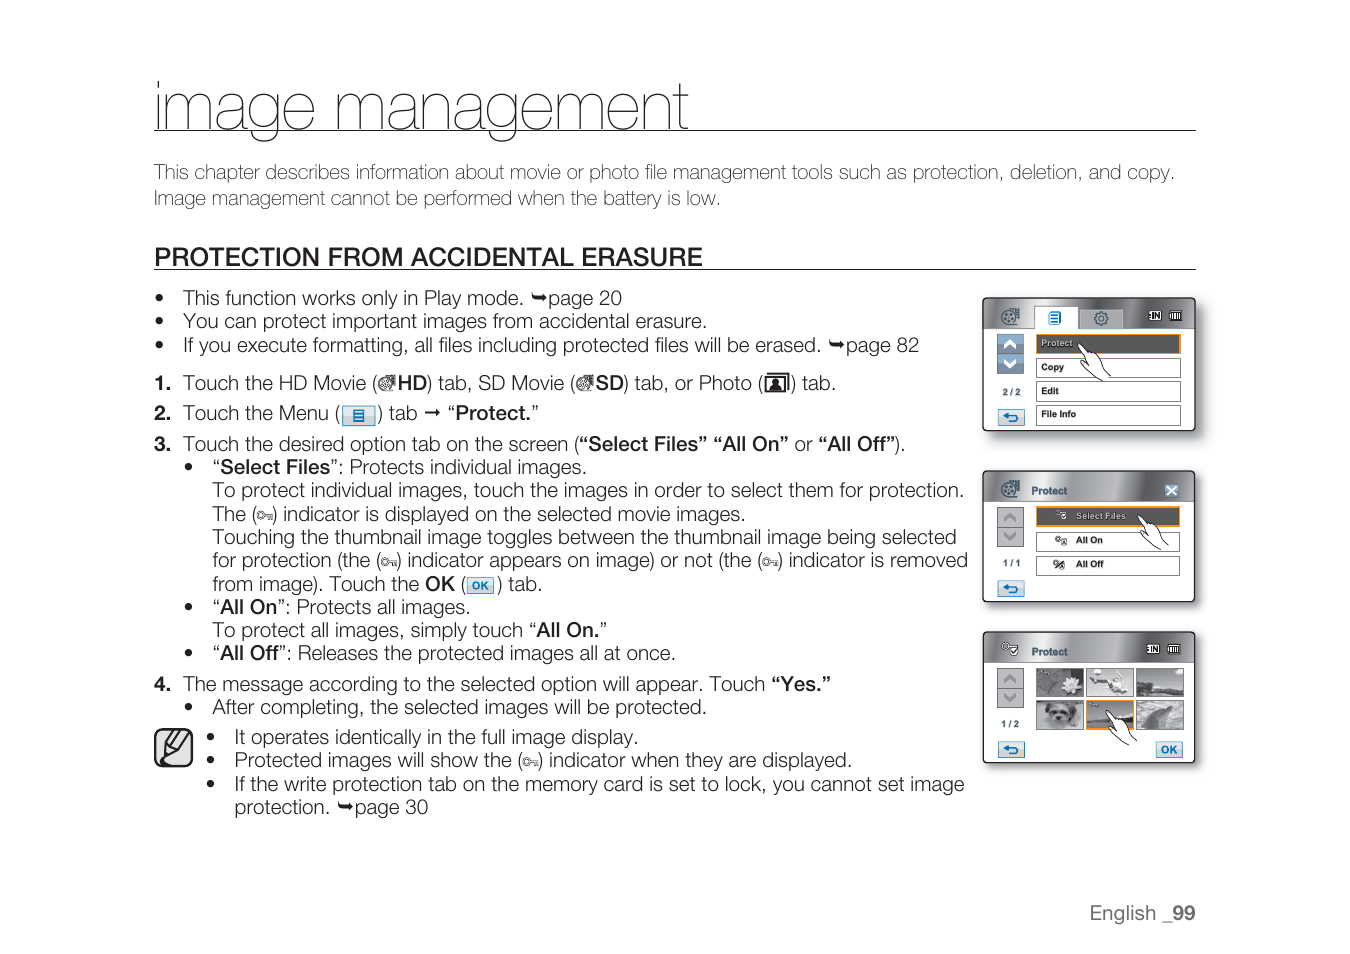 Image management, Protection from accidental erasure | Samsung HMX-H1062SP User Manual | Page 109 / 144